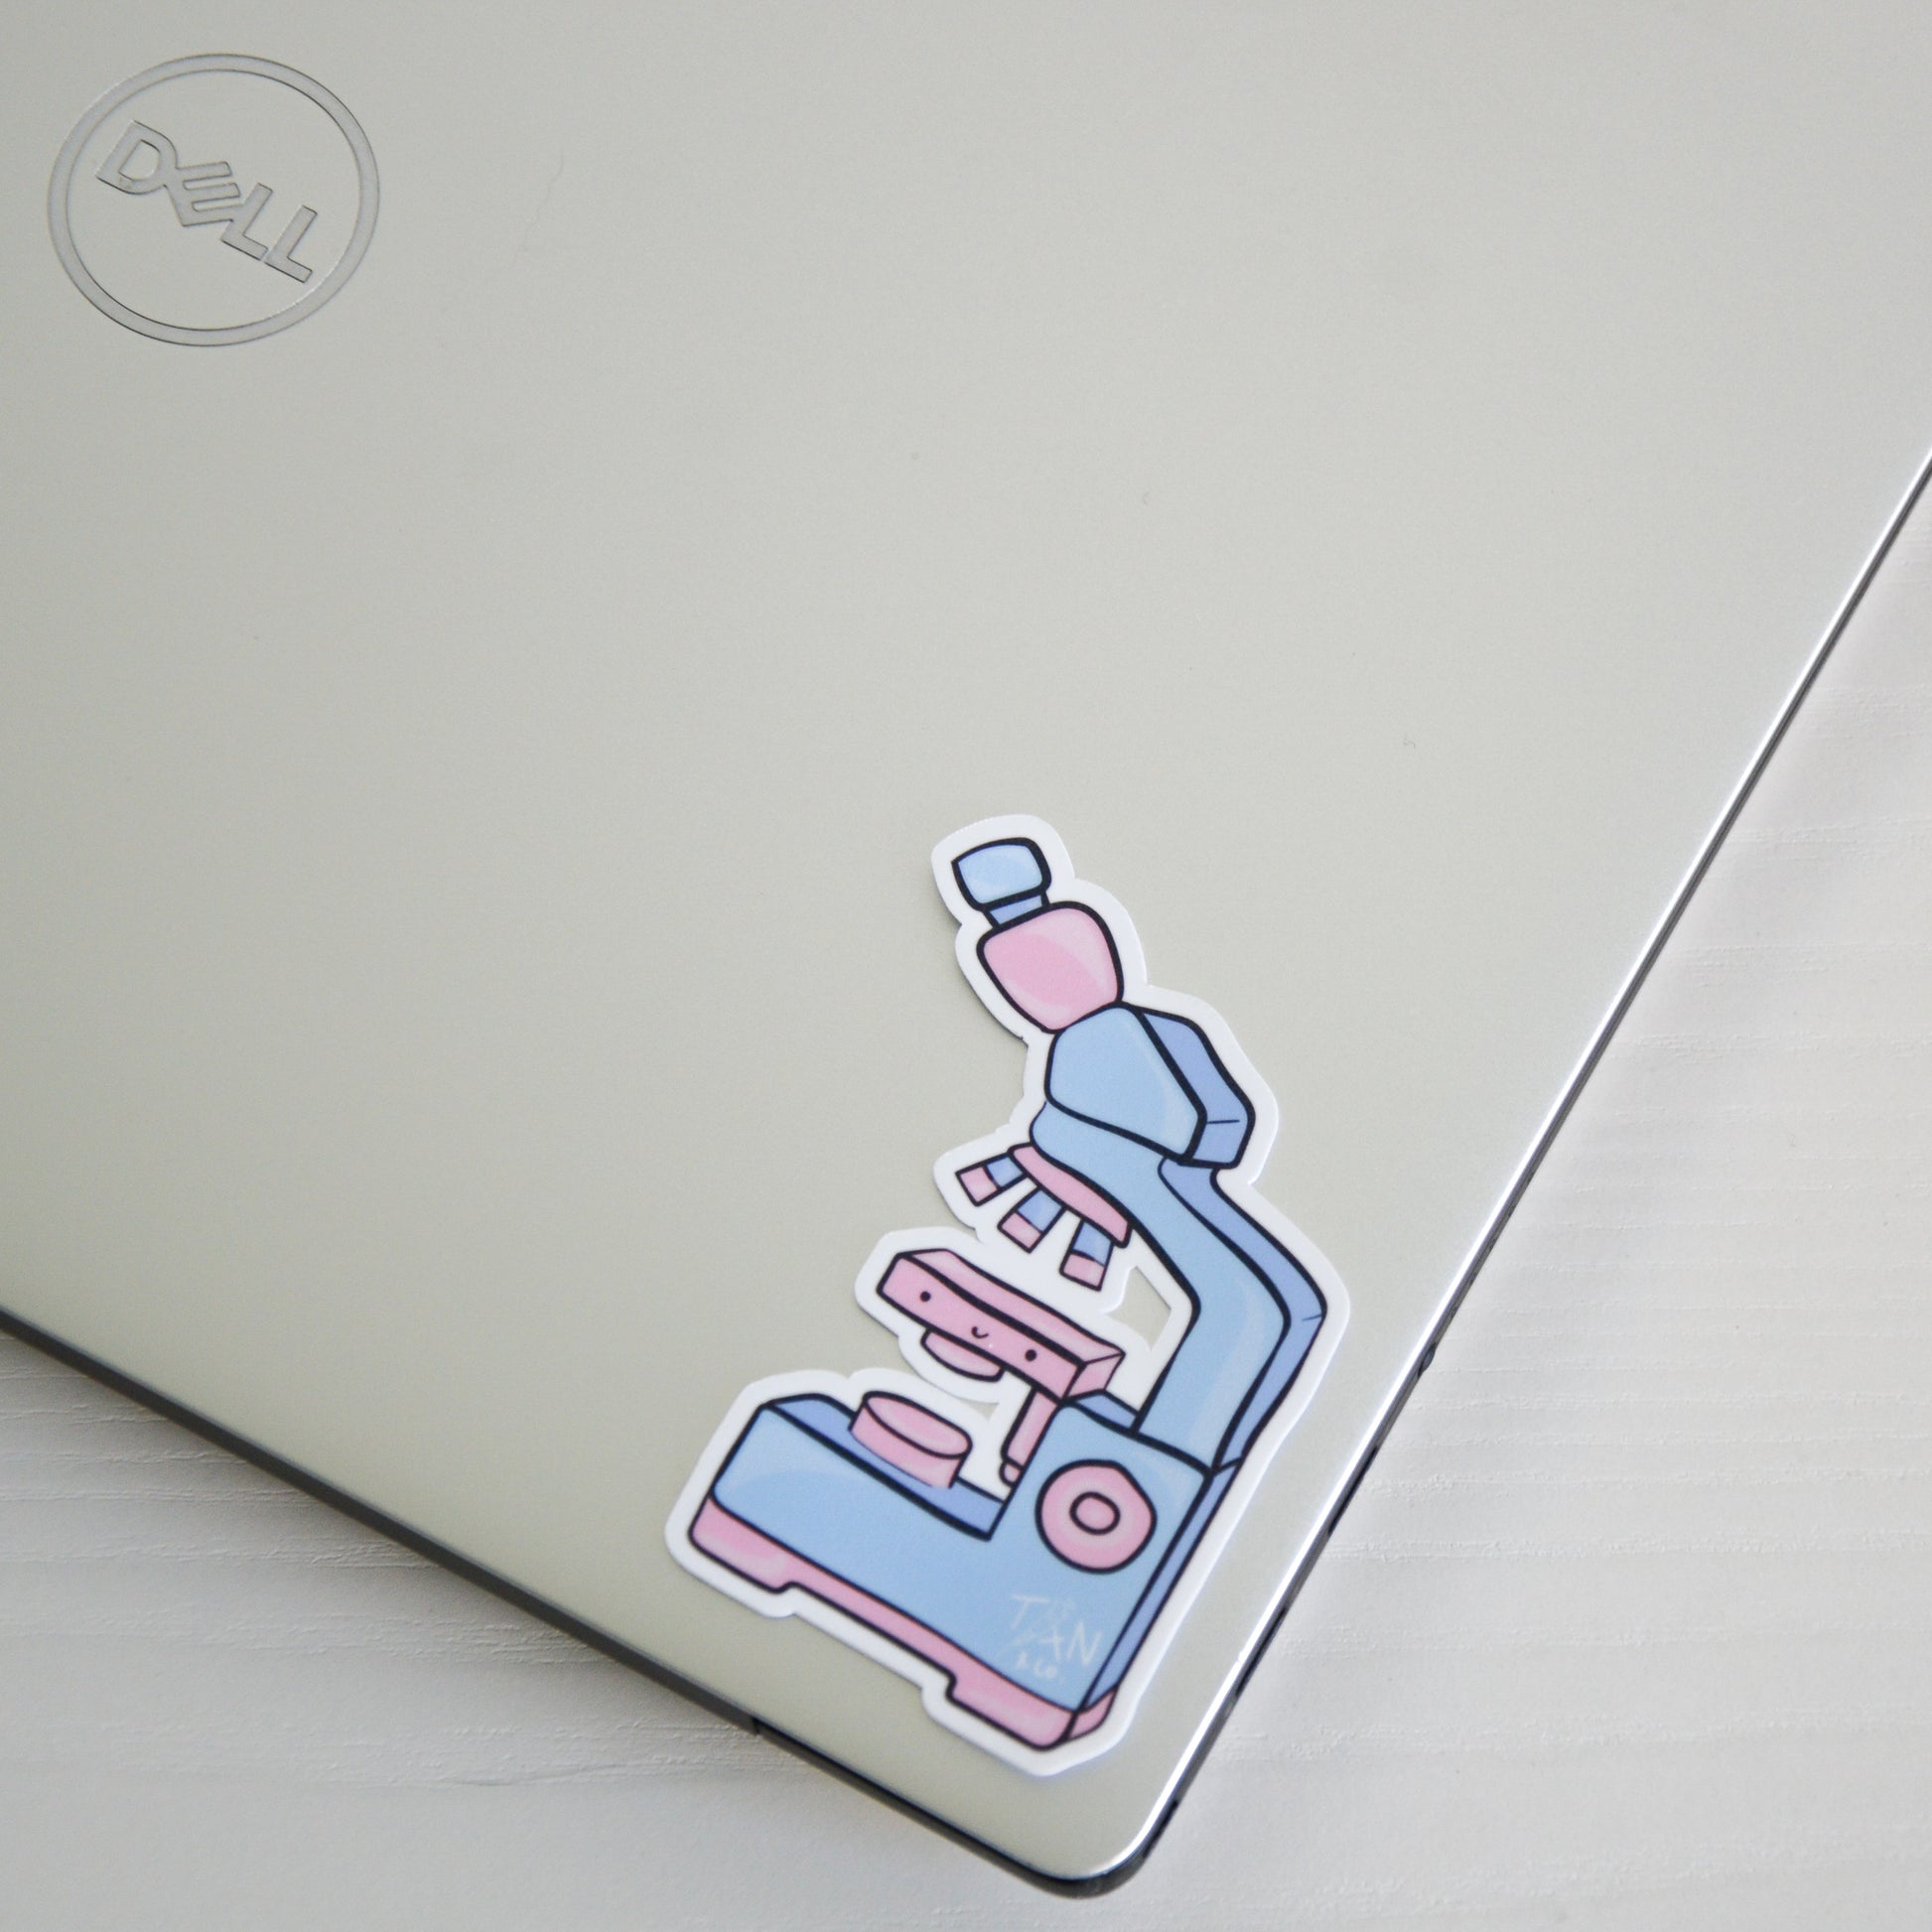 Pink and blue microscope sticker on laptop